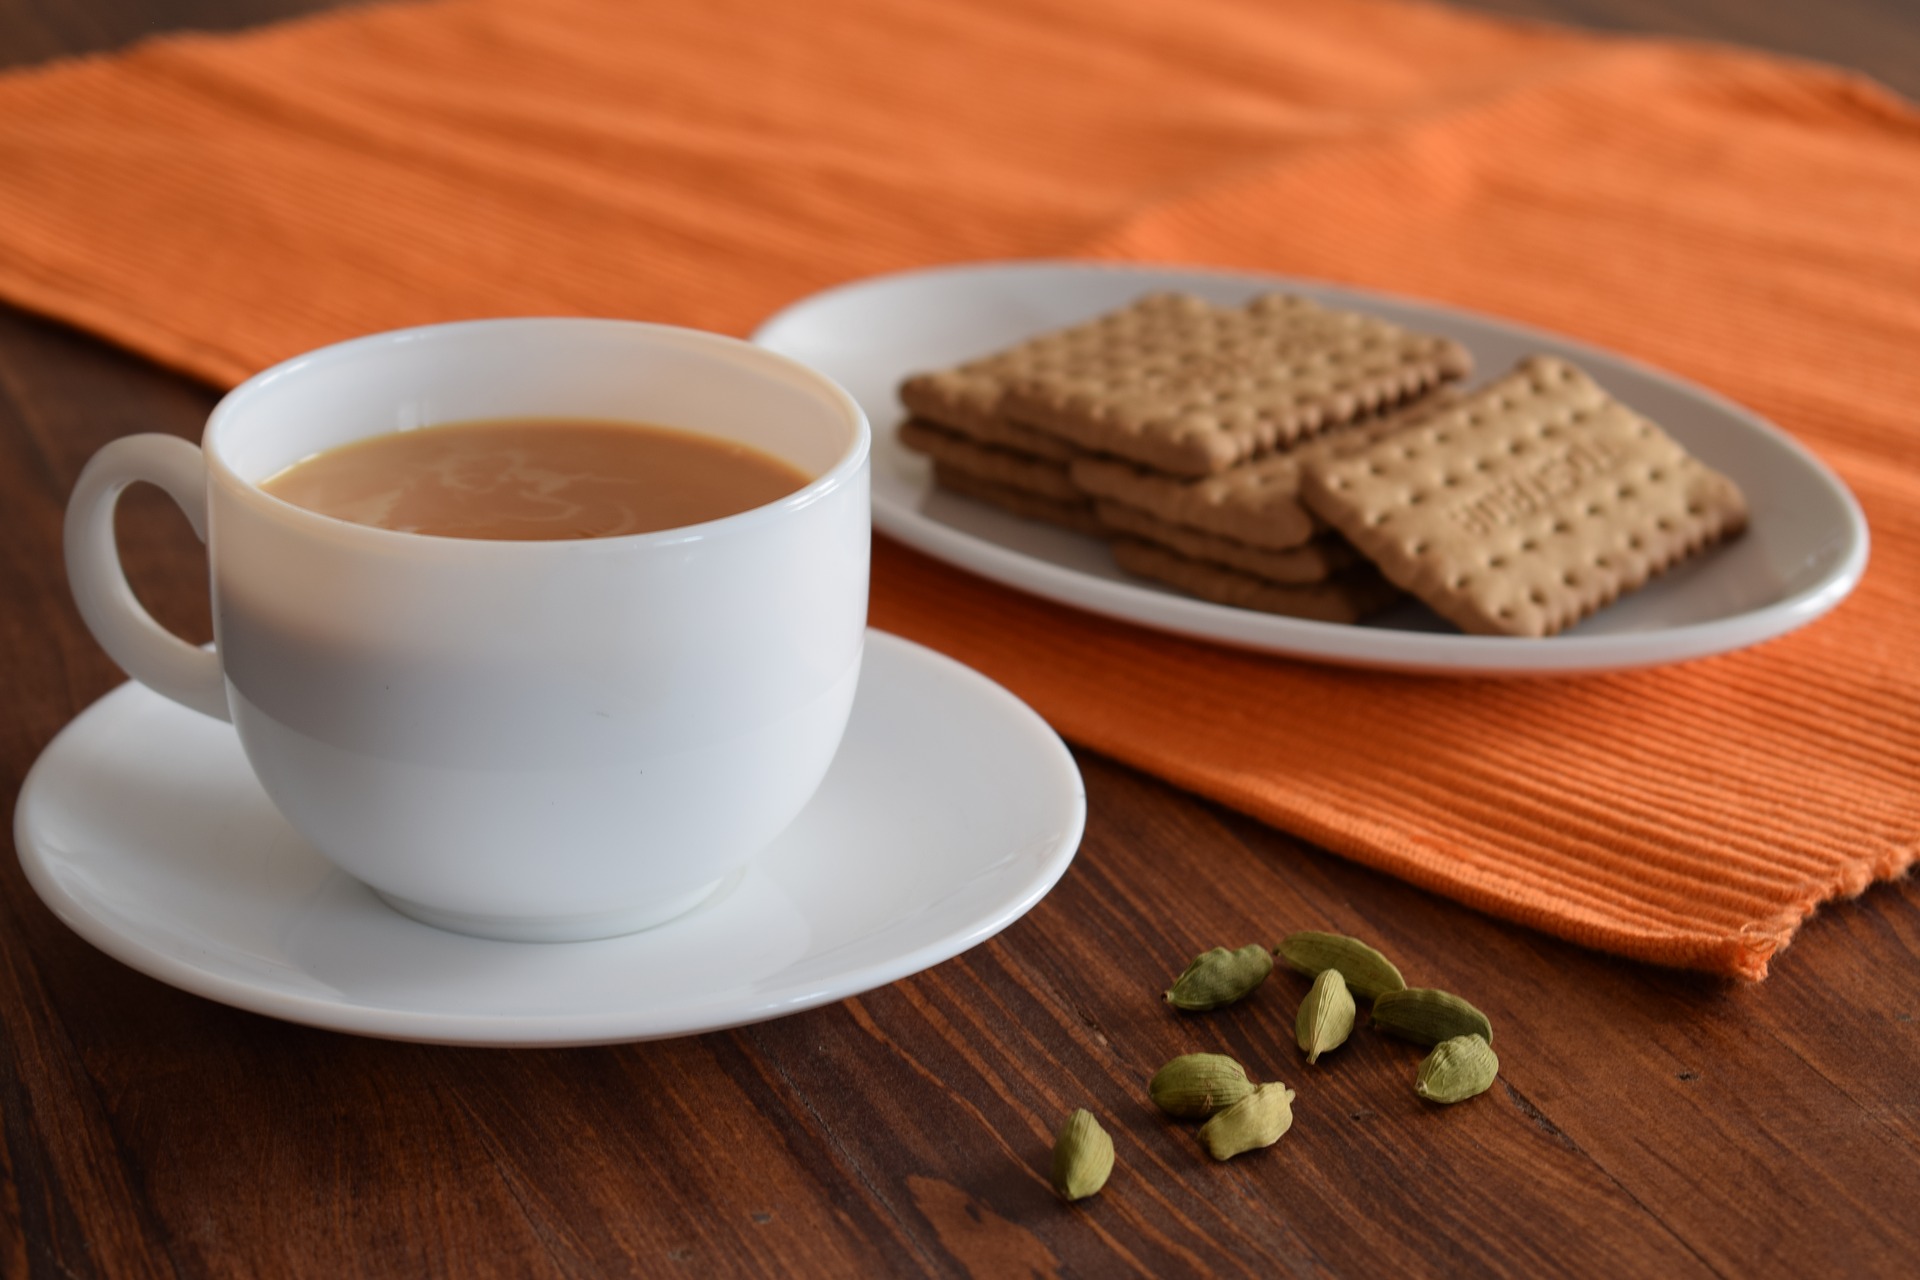 cardamom seeds and biscuit